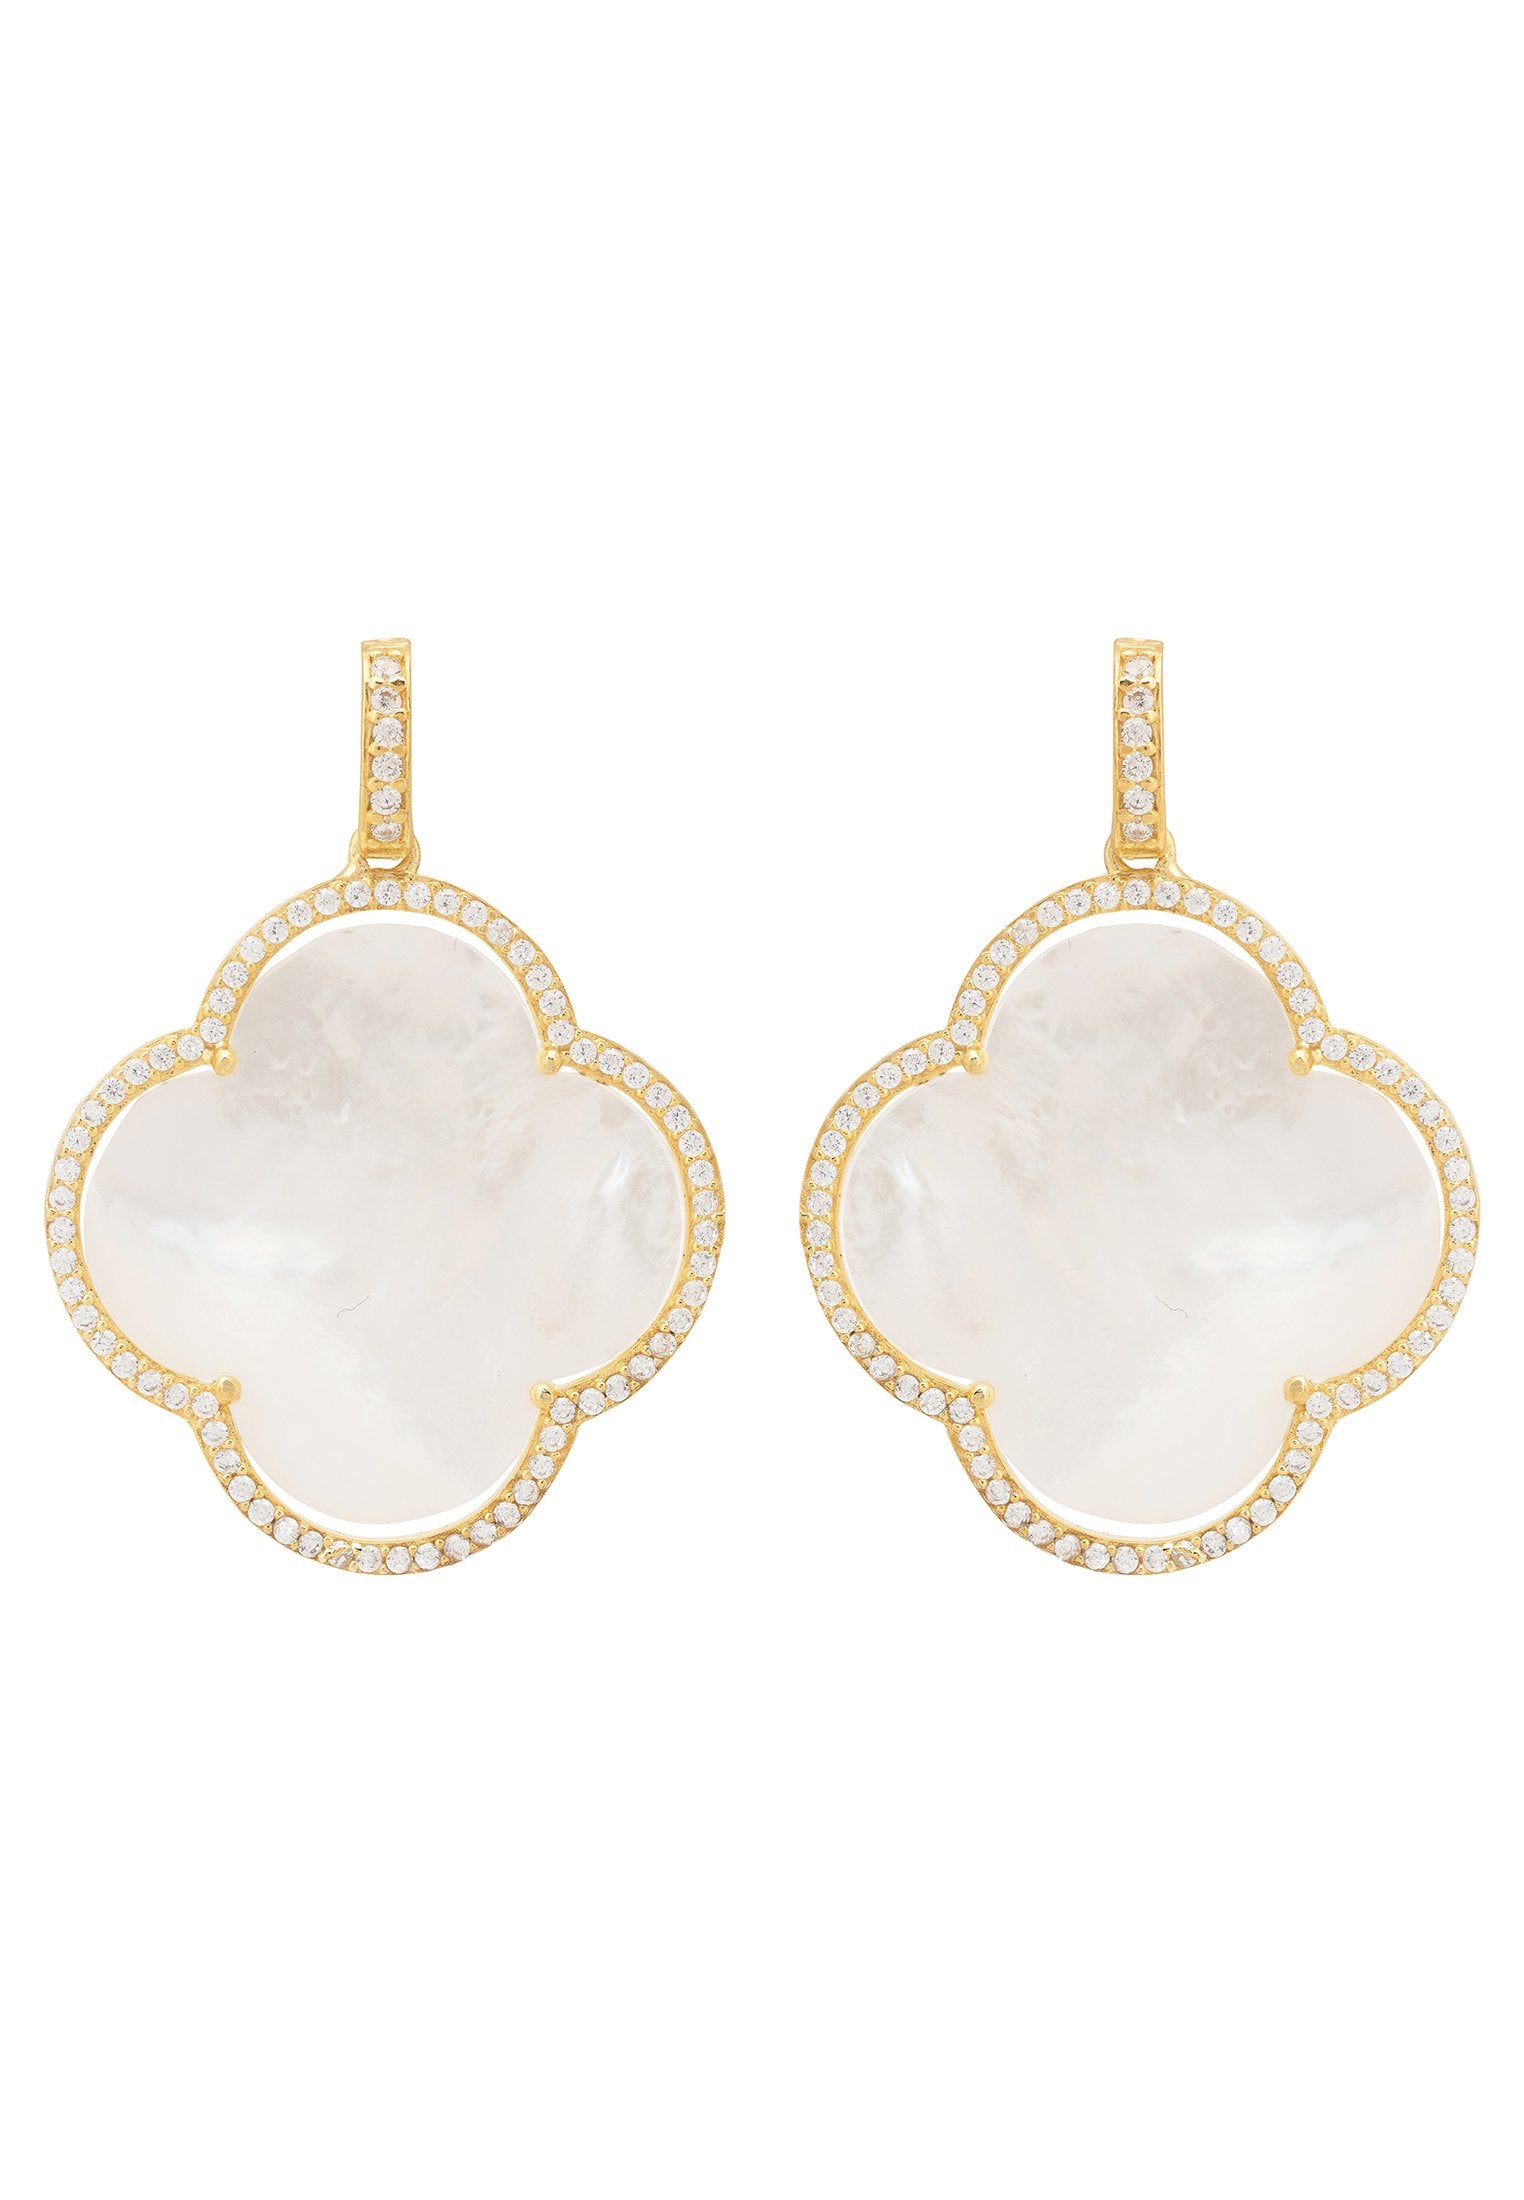 Mother of Pearl Clover Drop Earrings in Gold - Geometric Design with Latelita Sparkles and Symbolic Meaning - Jewelry & Watches - Bijou Her -  -  - 